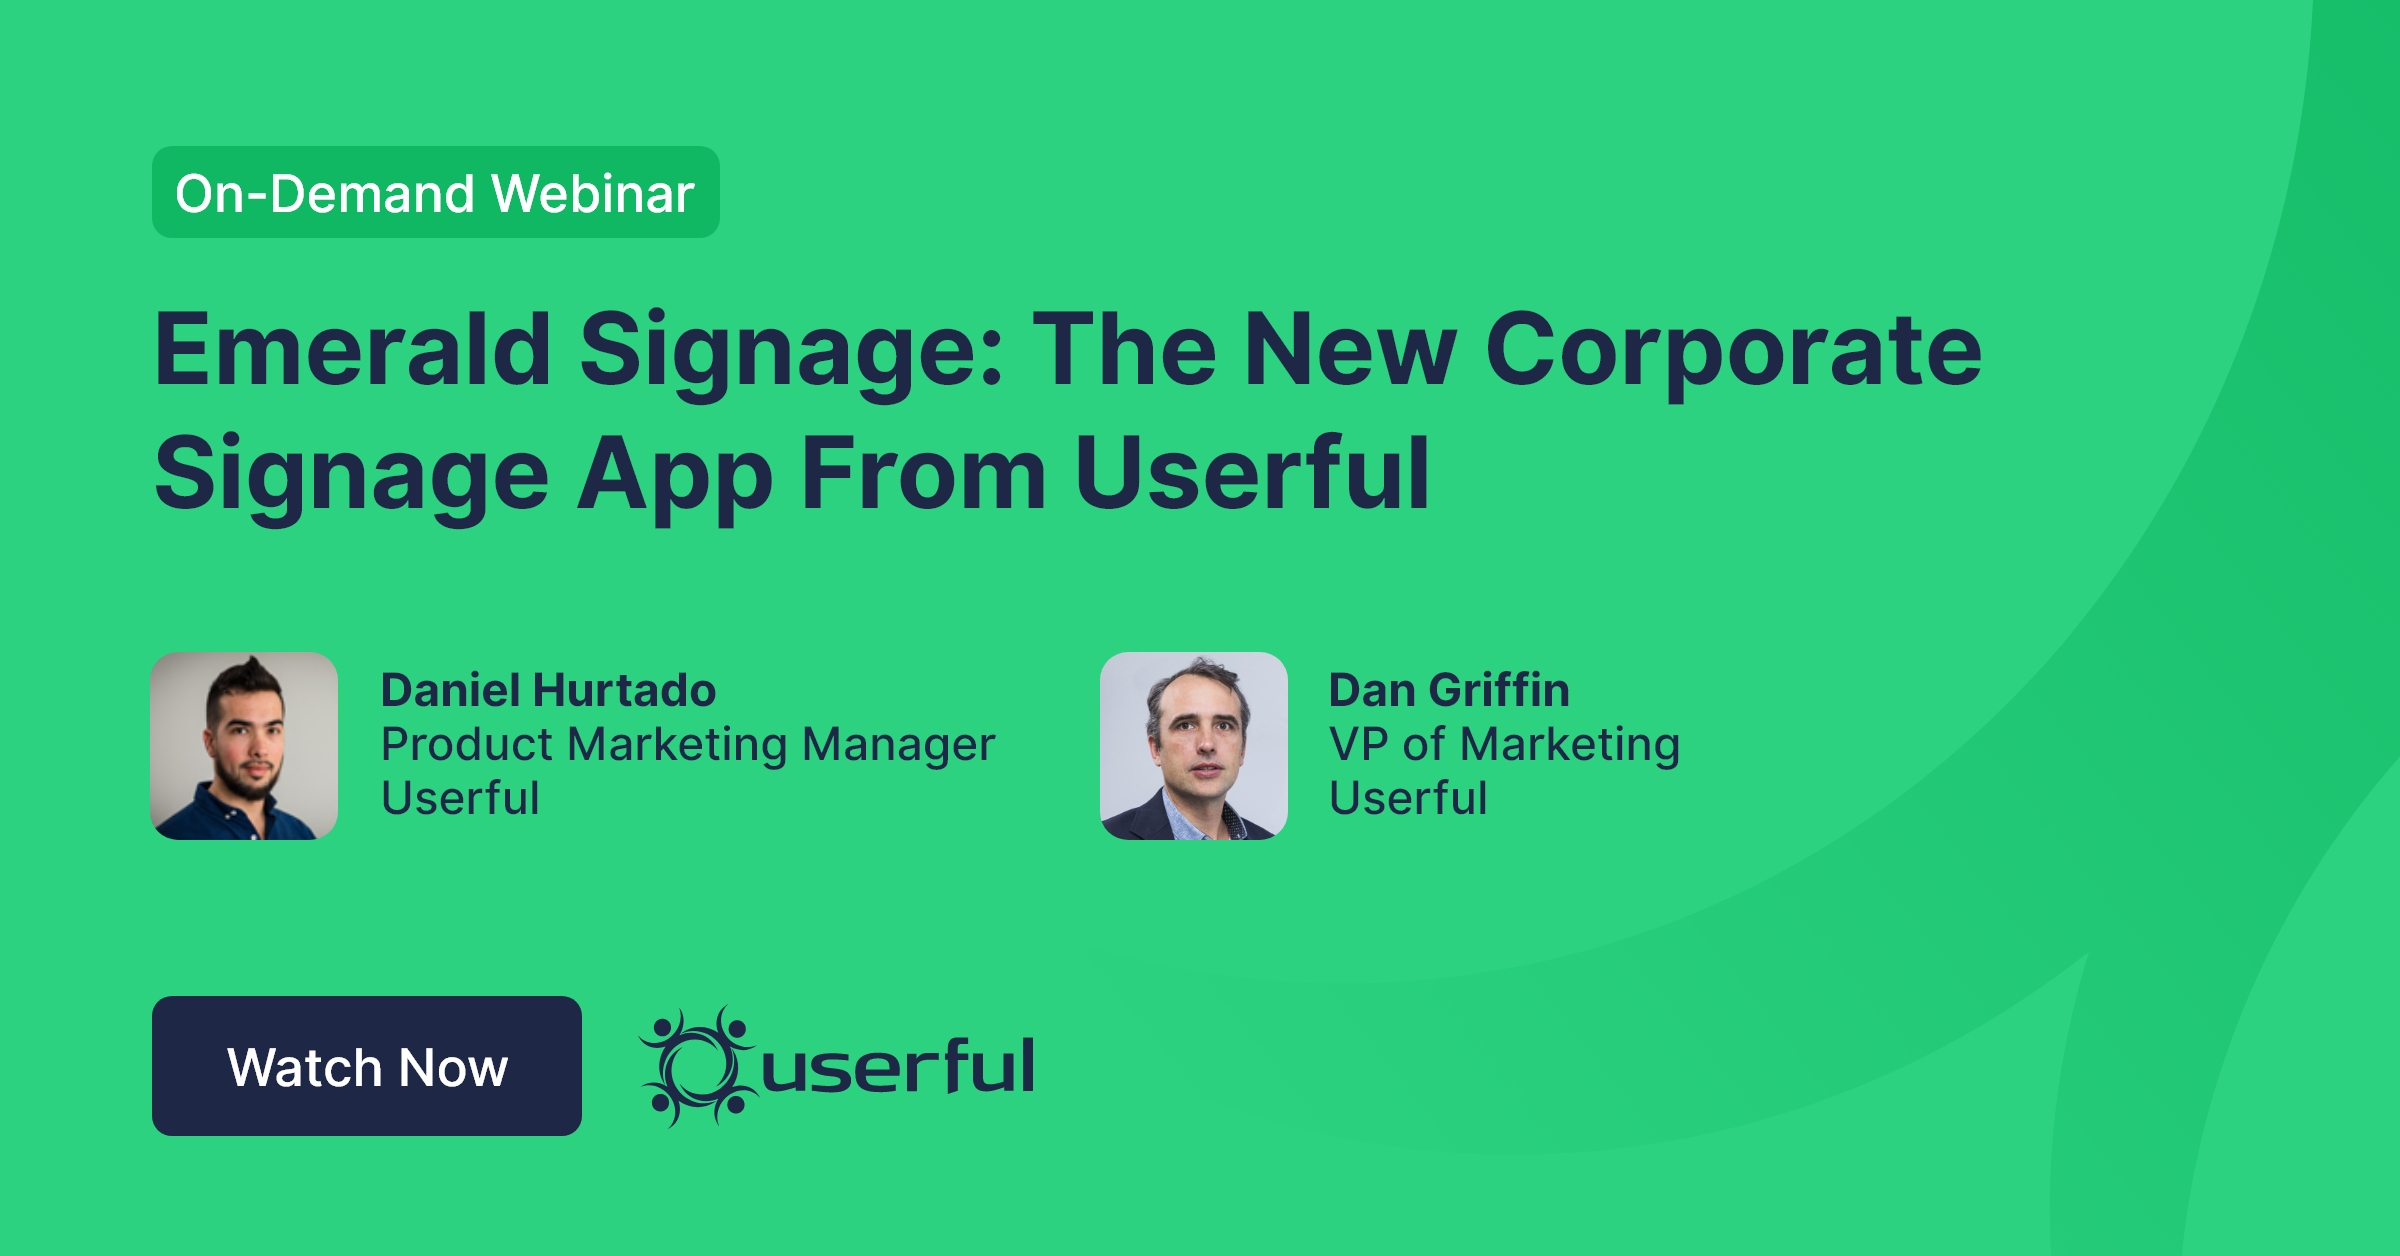 Webinar, Emerald Signage: The New Corporate Signage App From Userful, by Daniel Hurtado and Dan Griffin